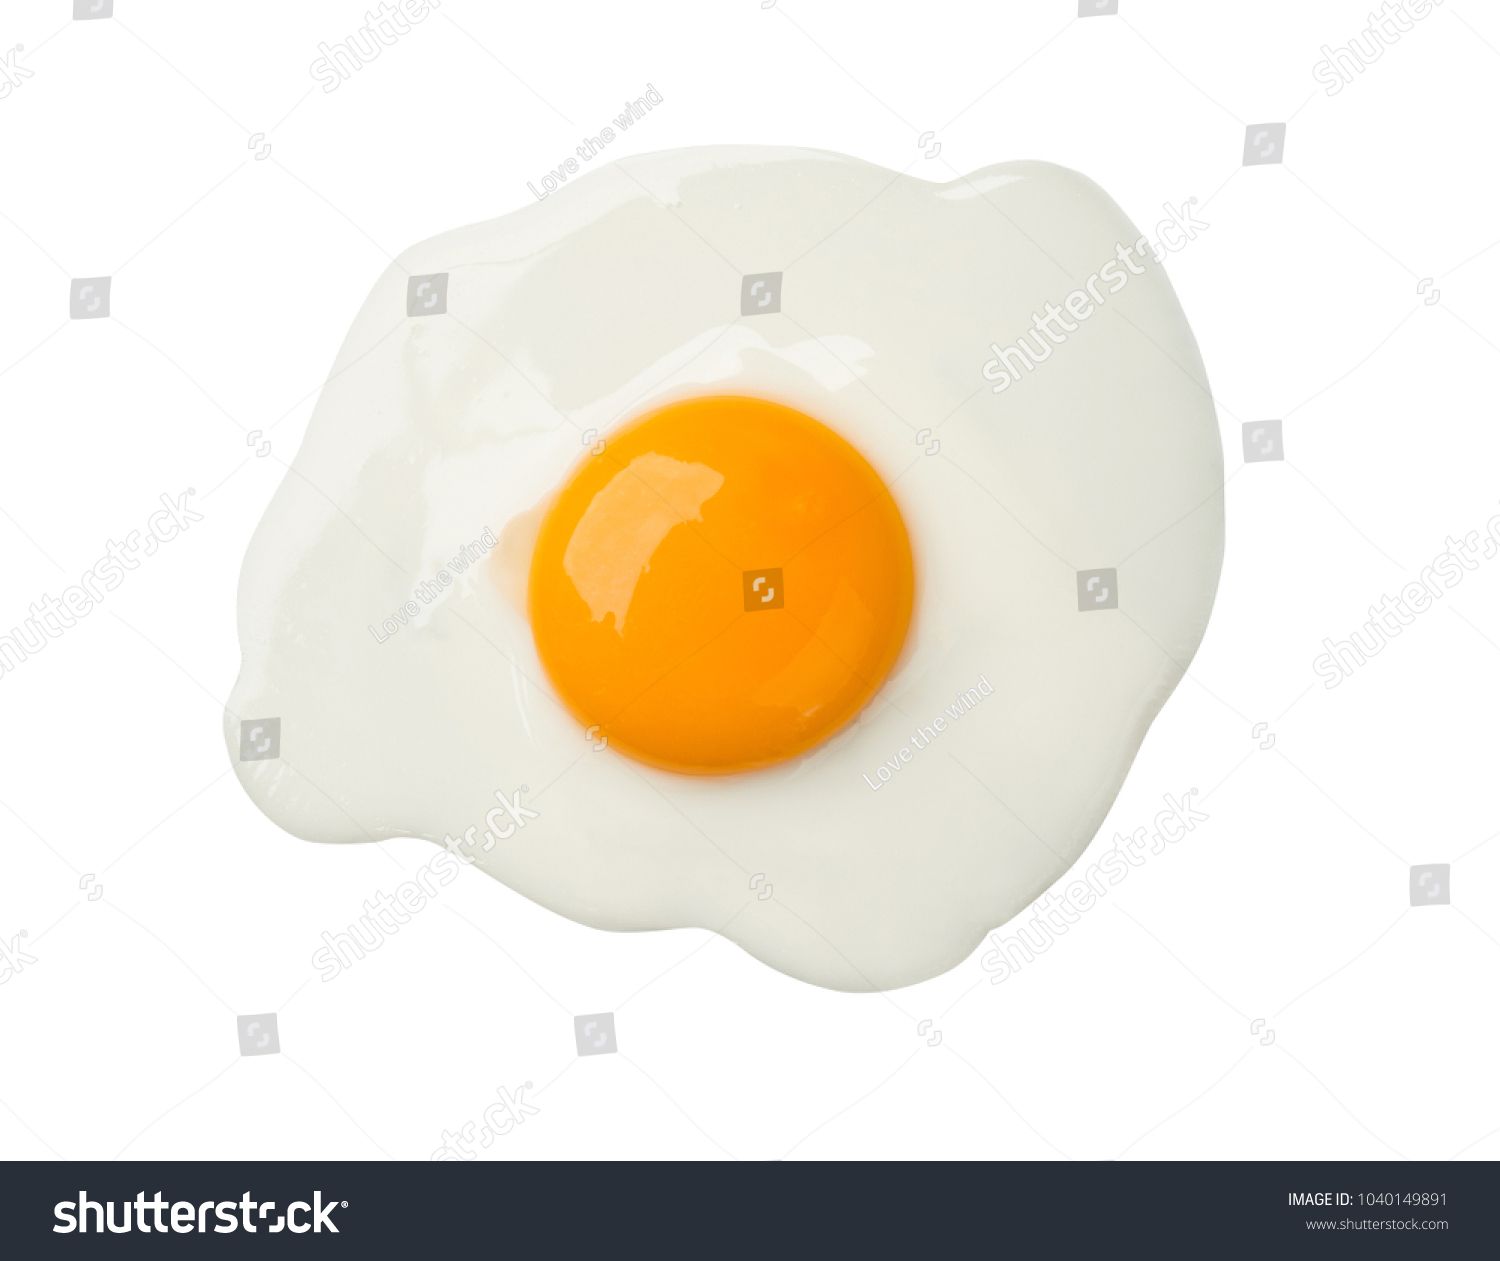 Fried egg isolated on white background on top view  food cooking photo object design